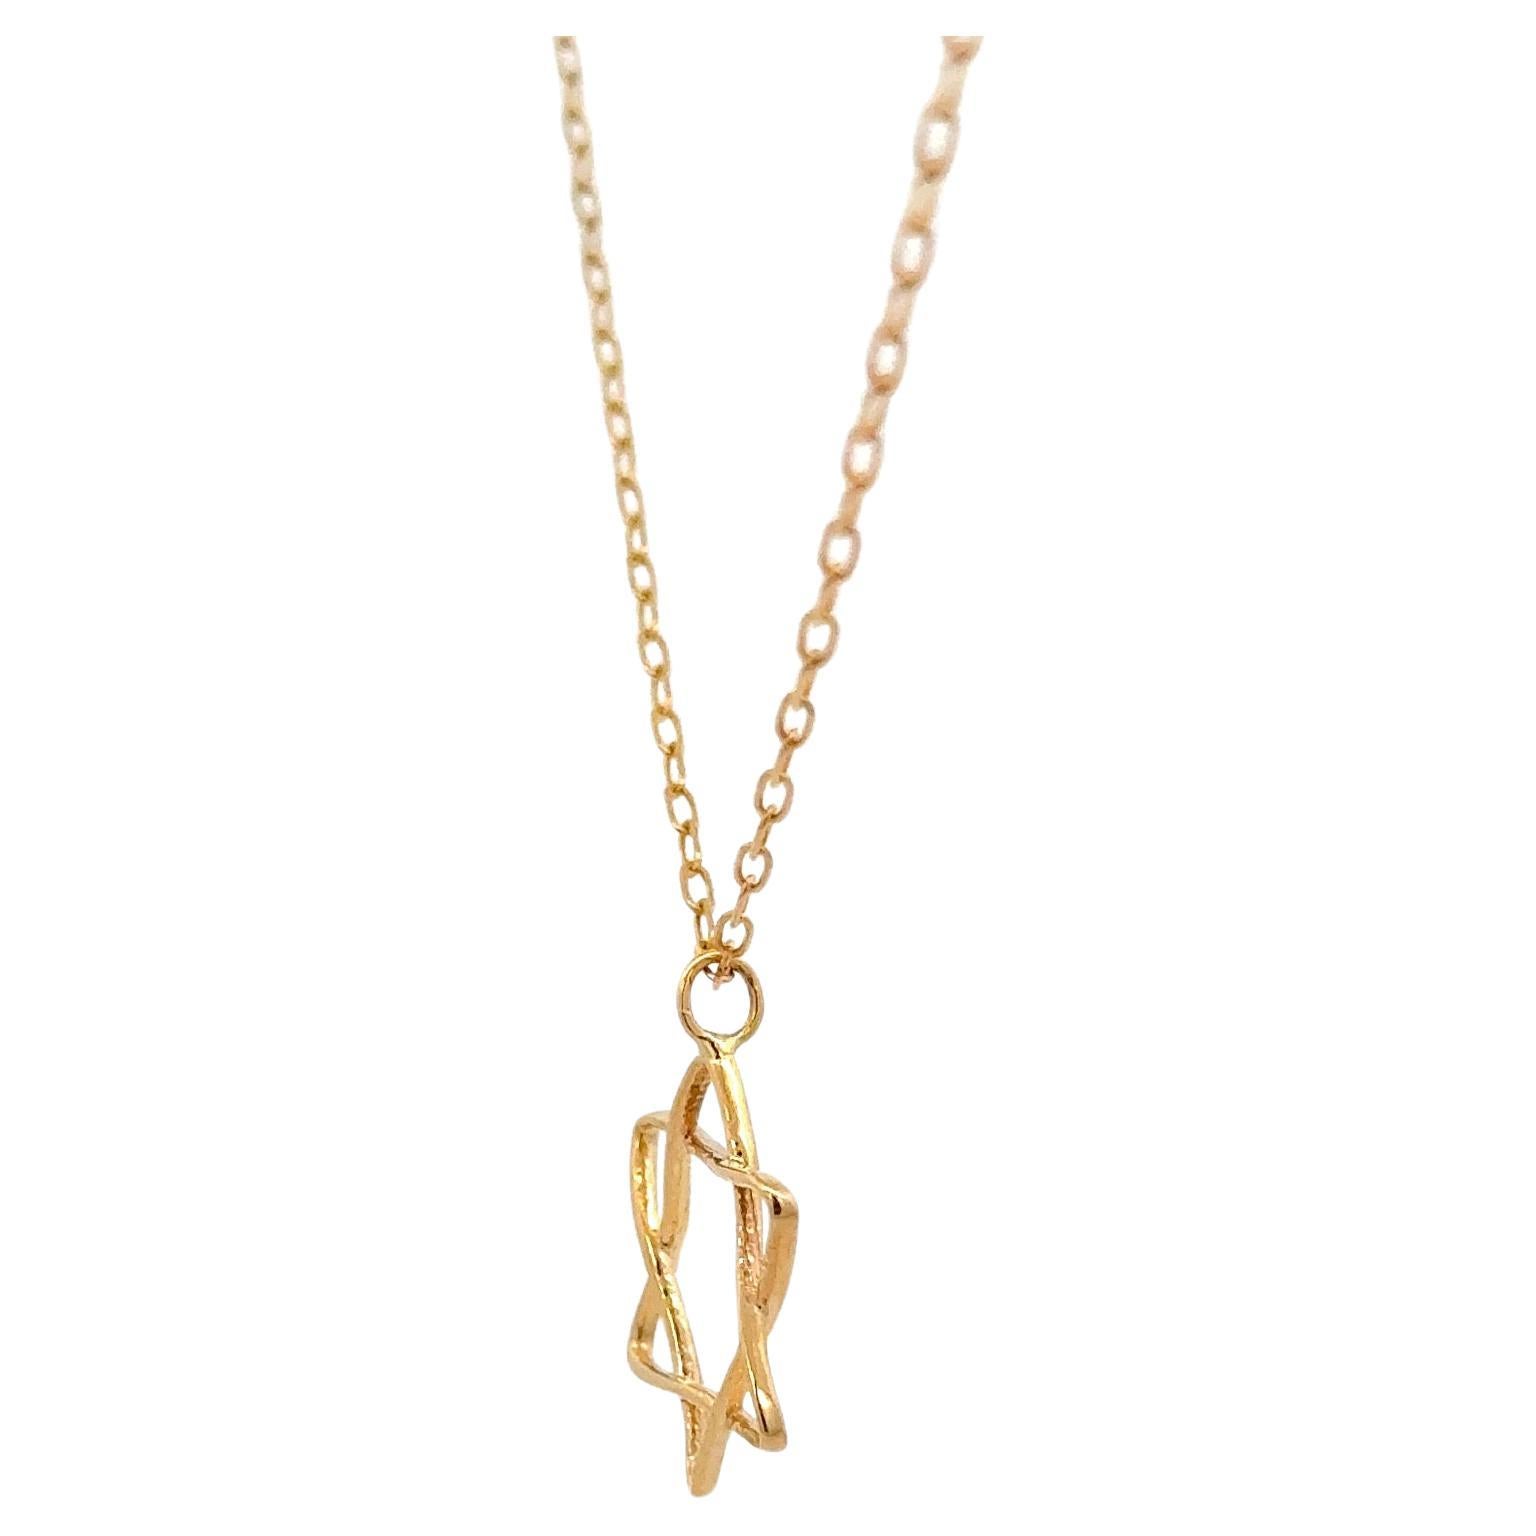 Star of David pendant featuring a 14 karat yellow gold wire motif on a cable chain.
